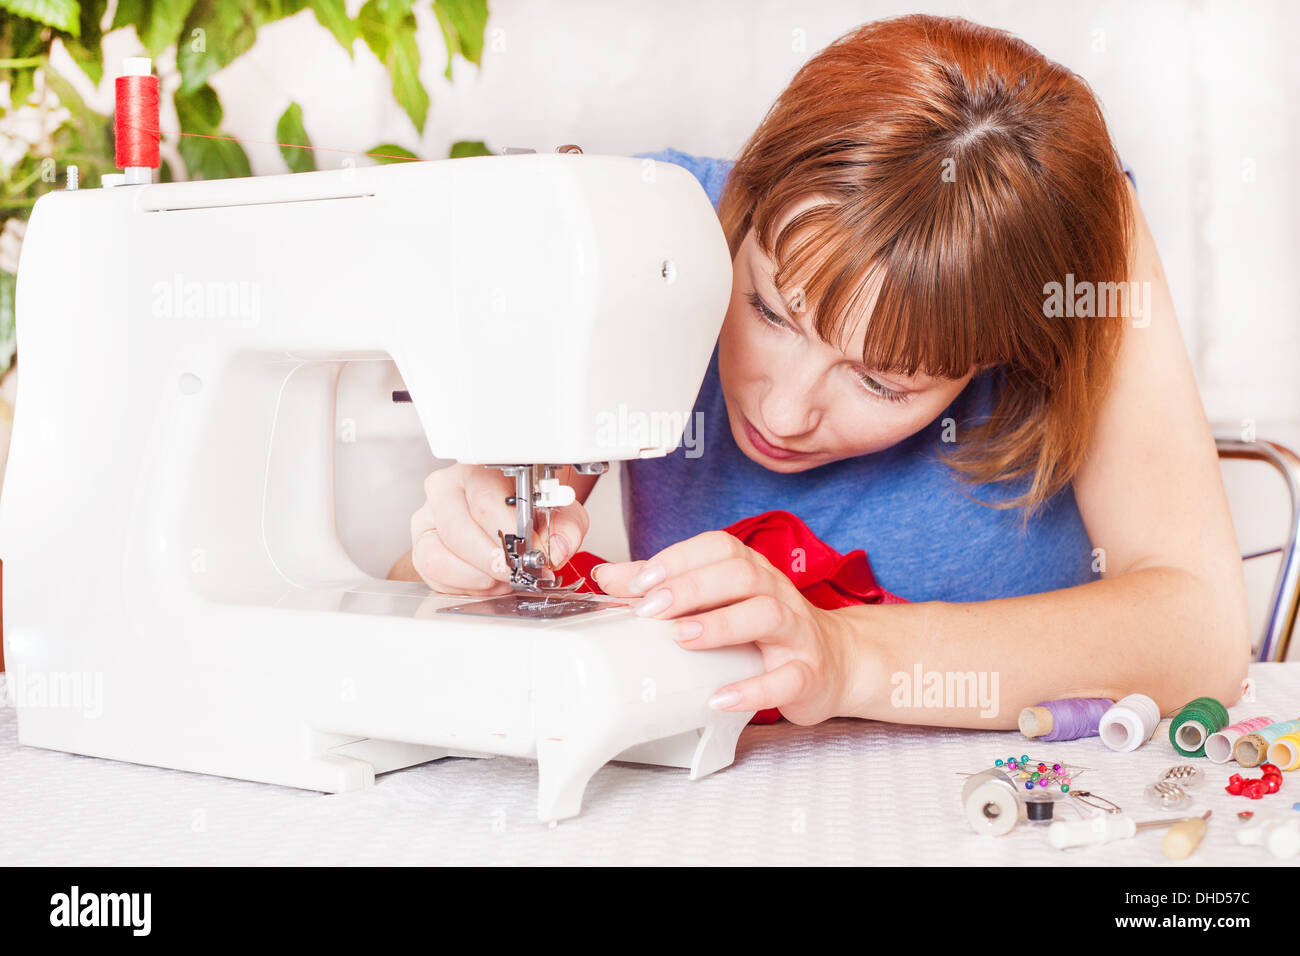 Working from home, a tailor at work. Stock Photo